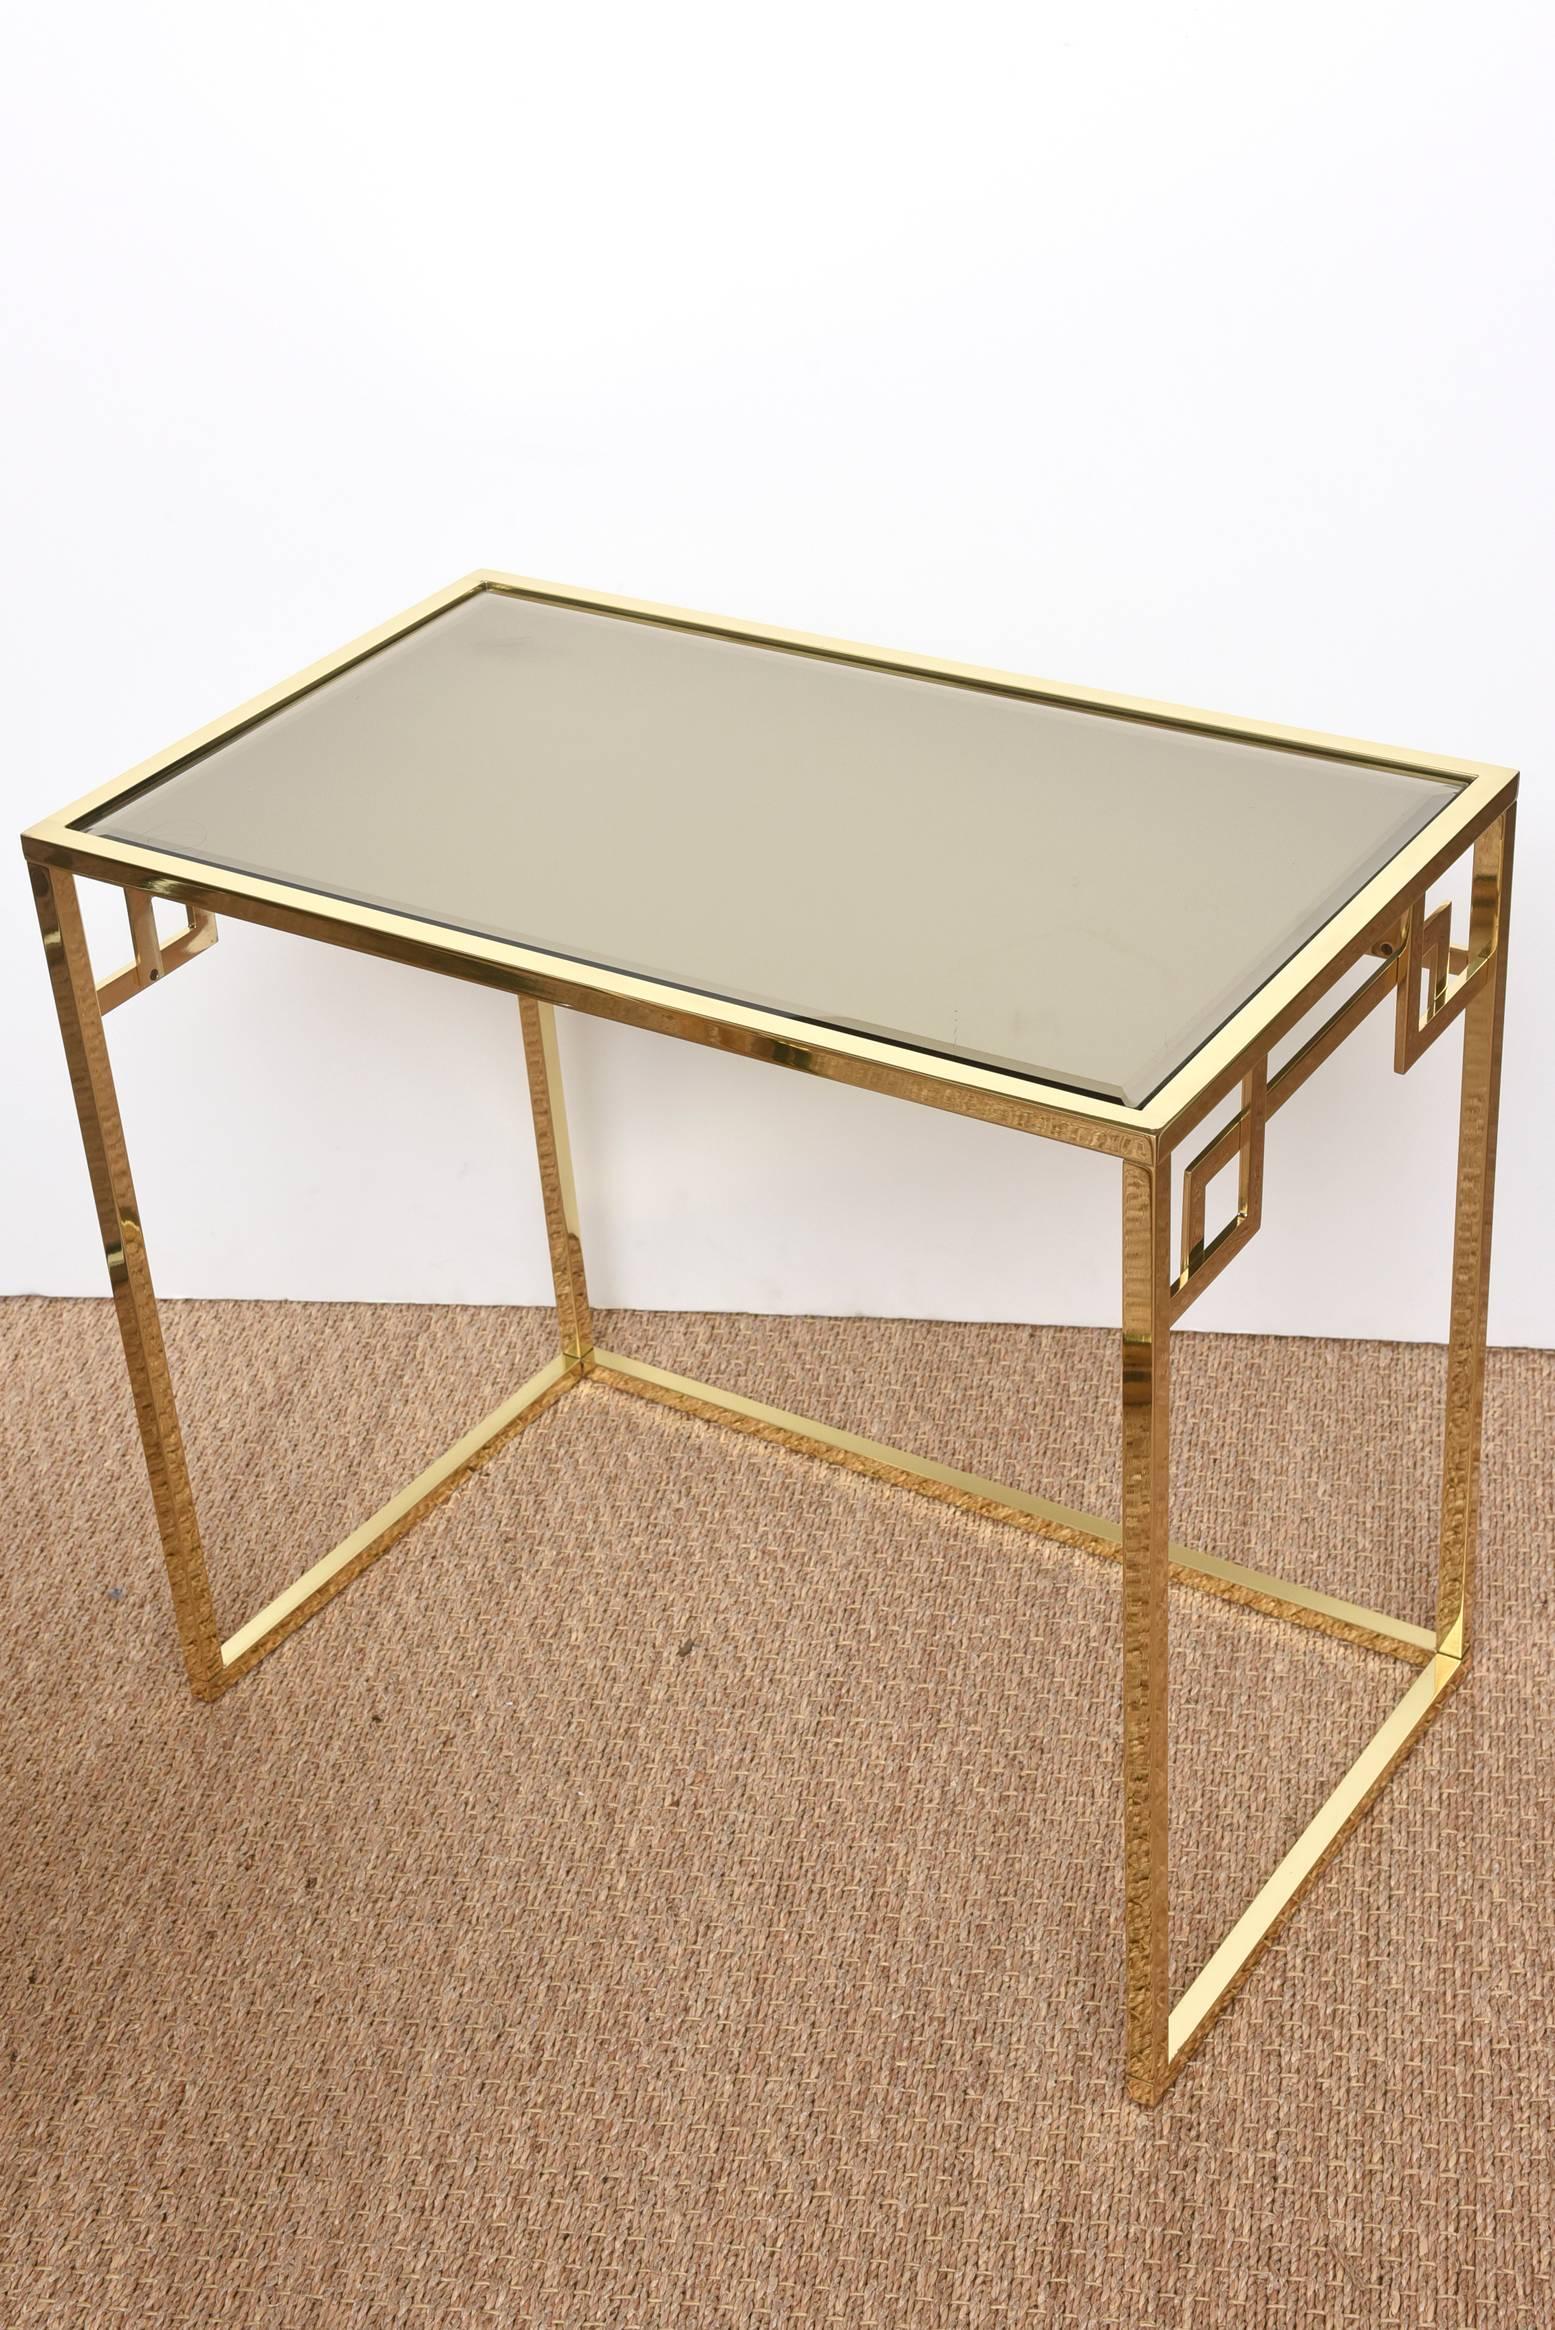 Italian Vintage Brass and Glass Greek Key Nesting Tables Set of Three For Sale 2